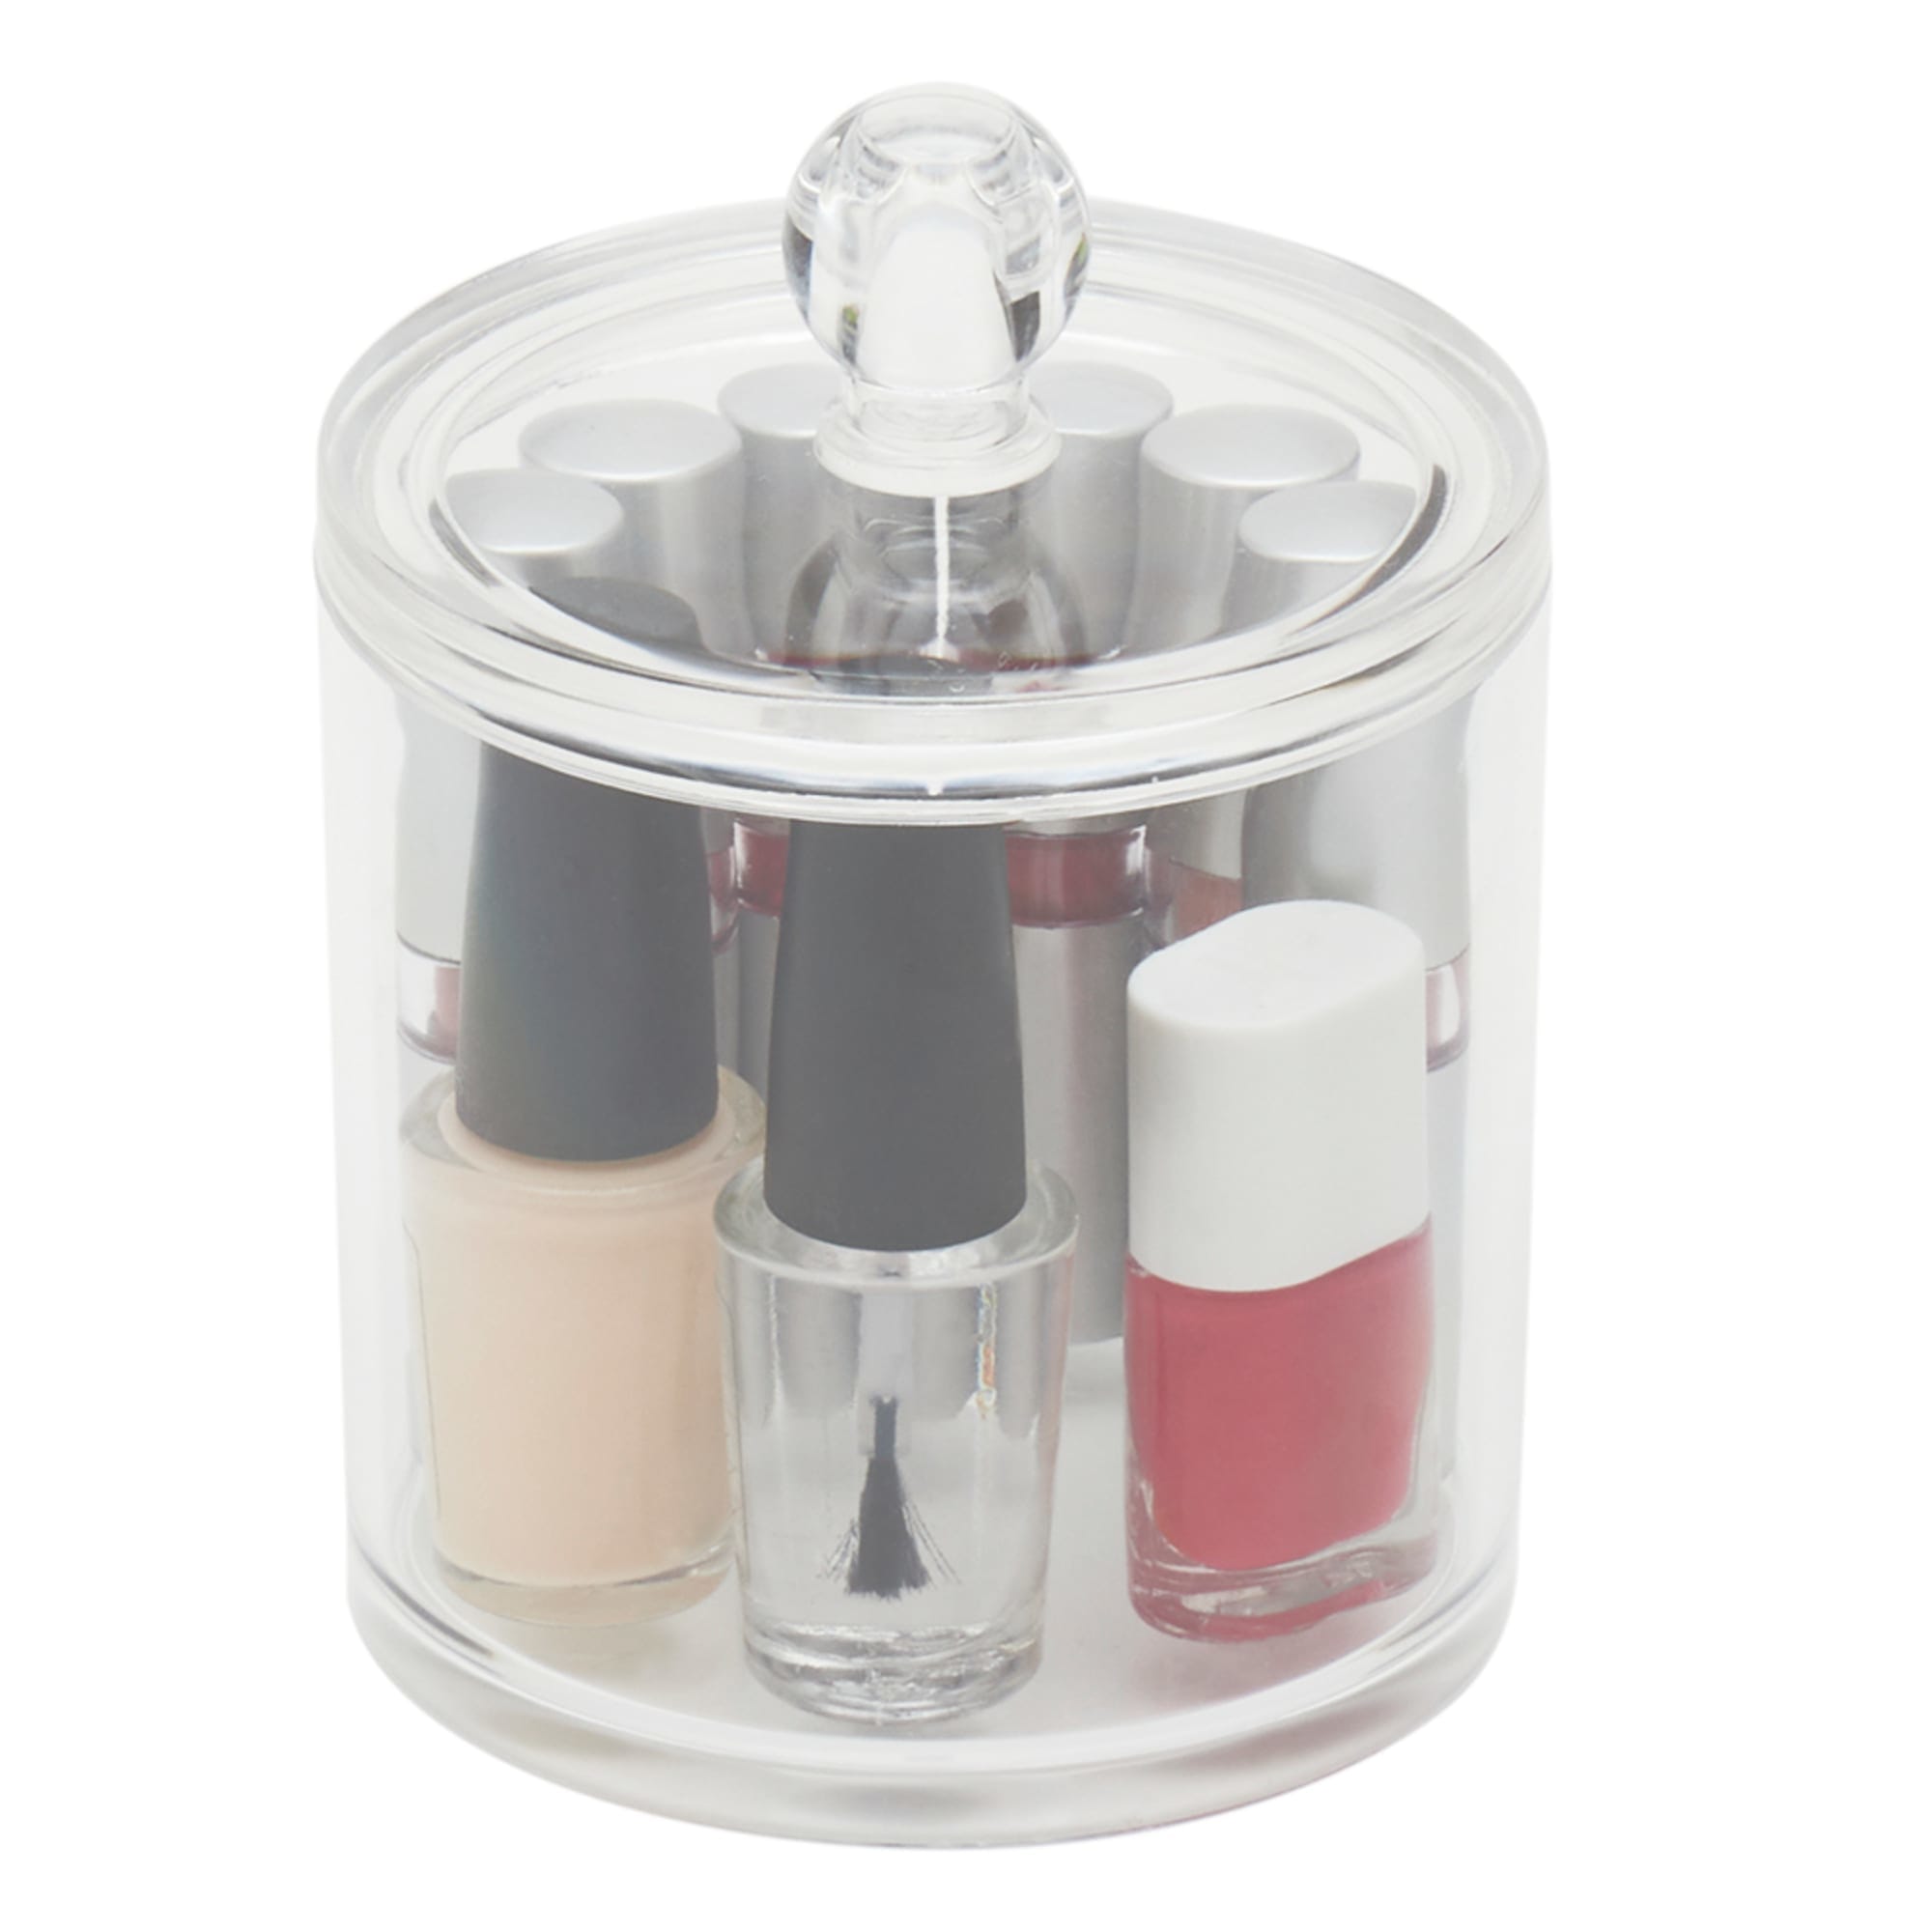 Home Basics Small Plastic Cosmetic Organizer with Lid, Clear $2.50 EACH, CASE PACK OF 12